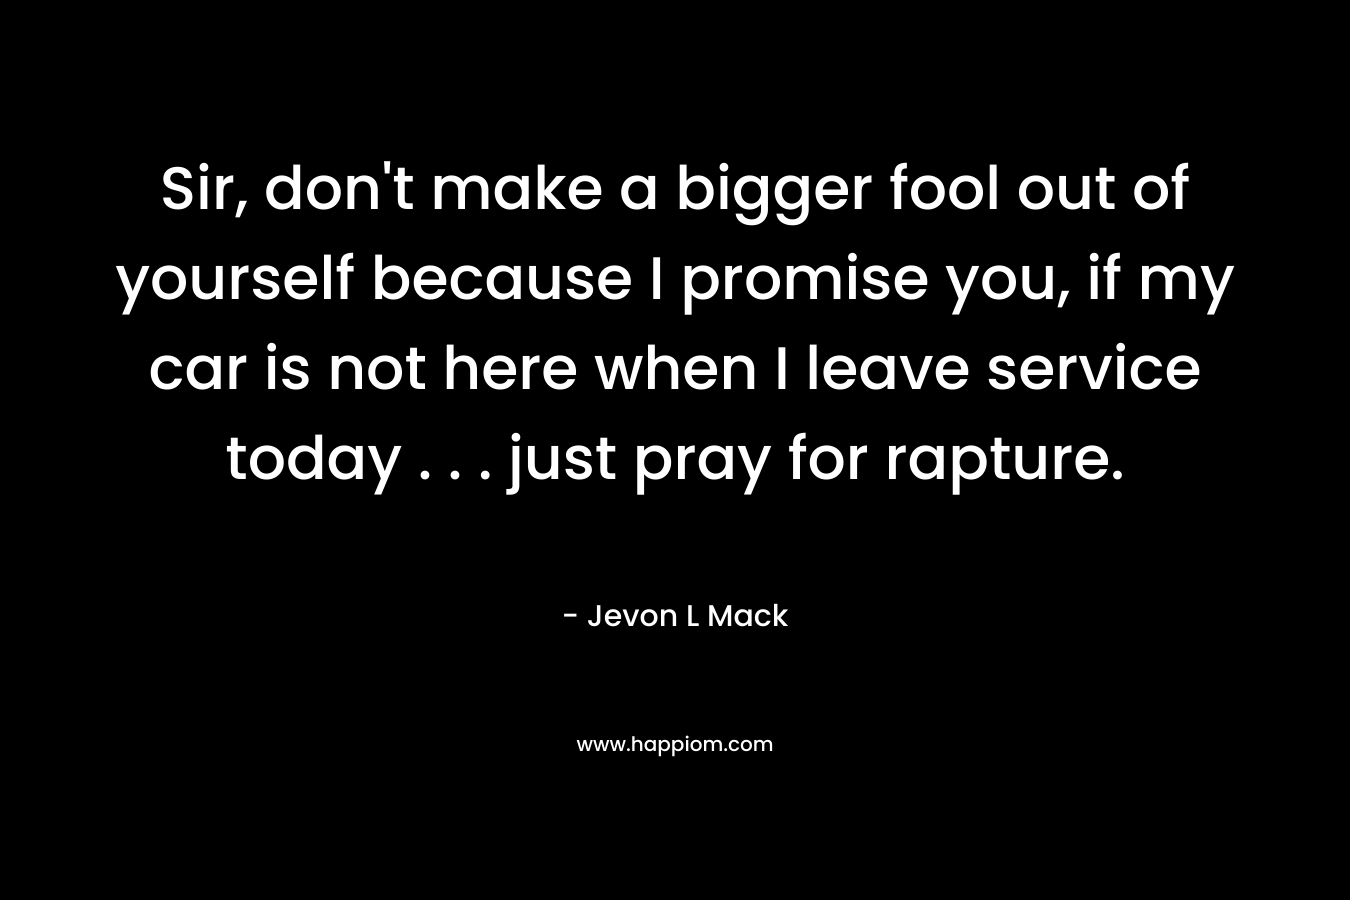 Sir, don’t make a bigger fool out of yourself because I promise you, if my car is not here when I leave service today . . . just pray for rapture. – Jevon L Mack